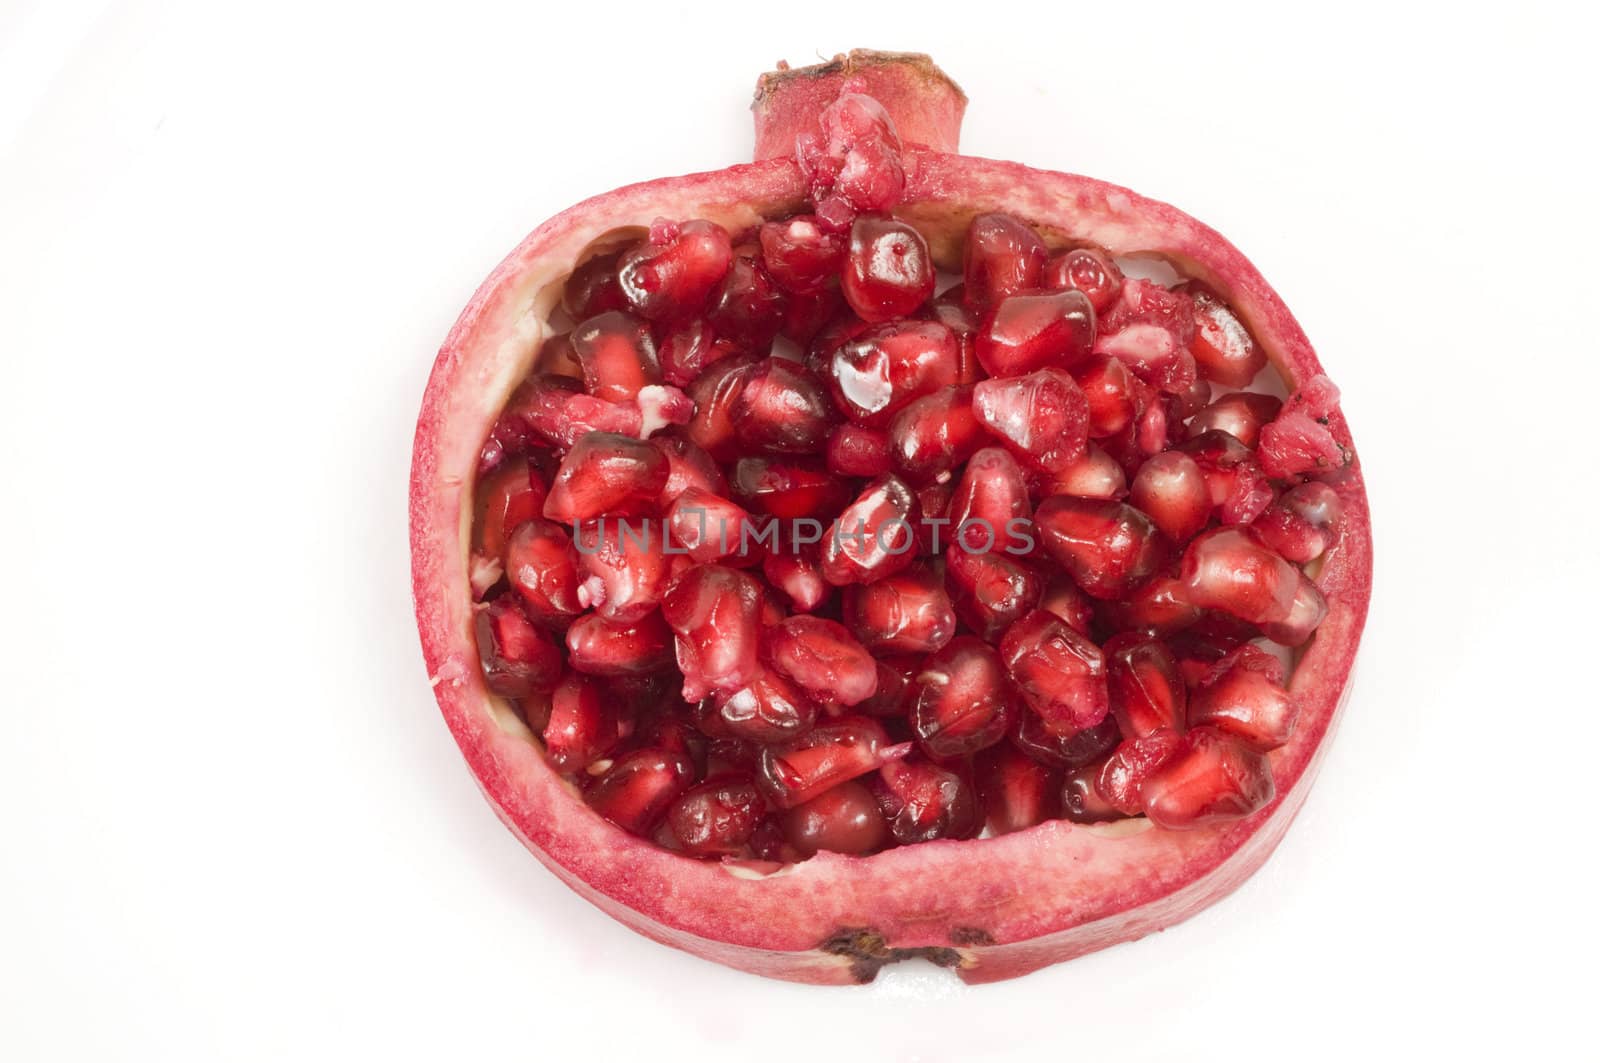 Portion of a pomegranate shell holding the vibrant red berries